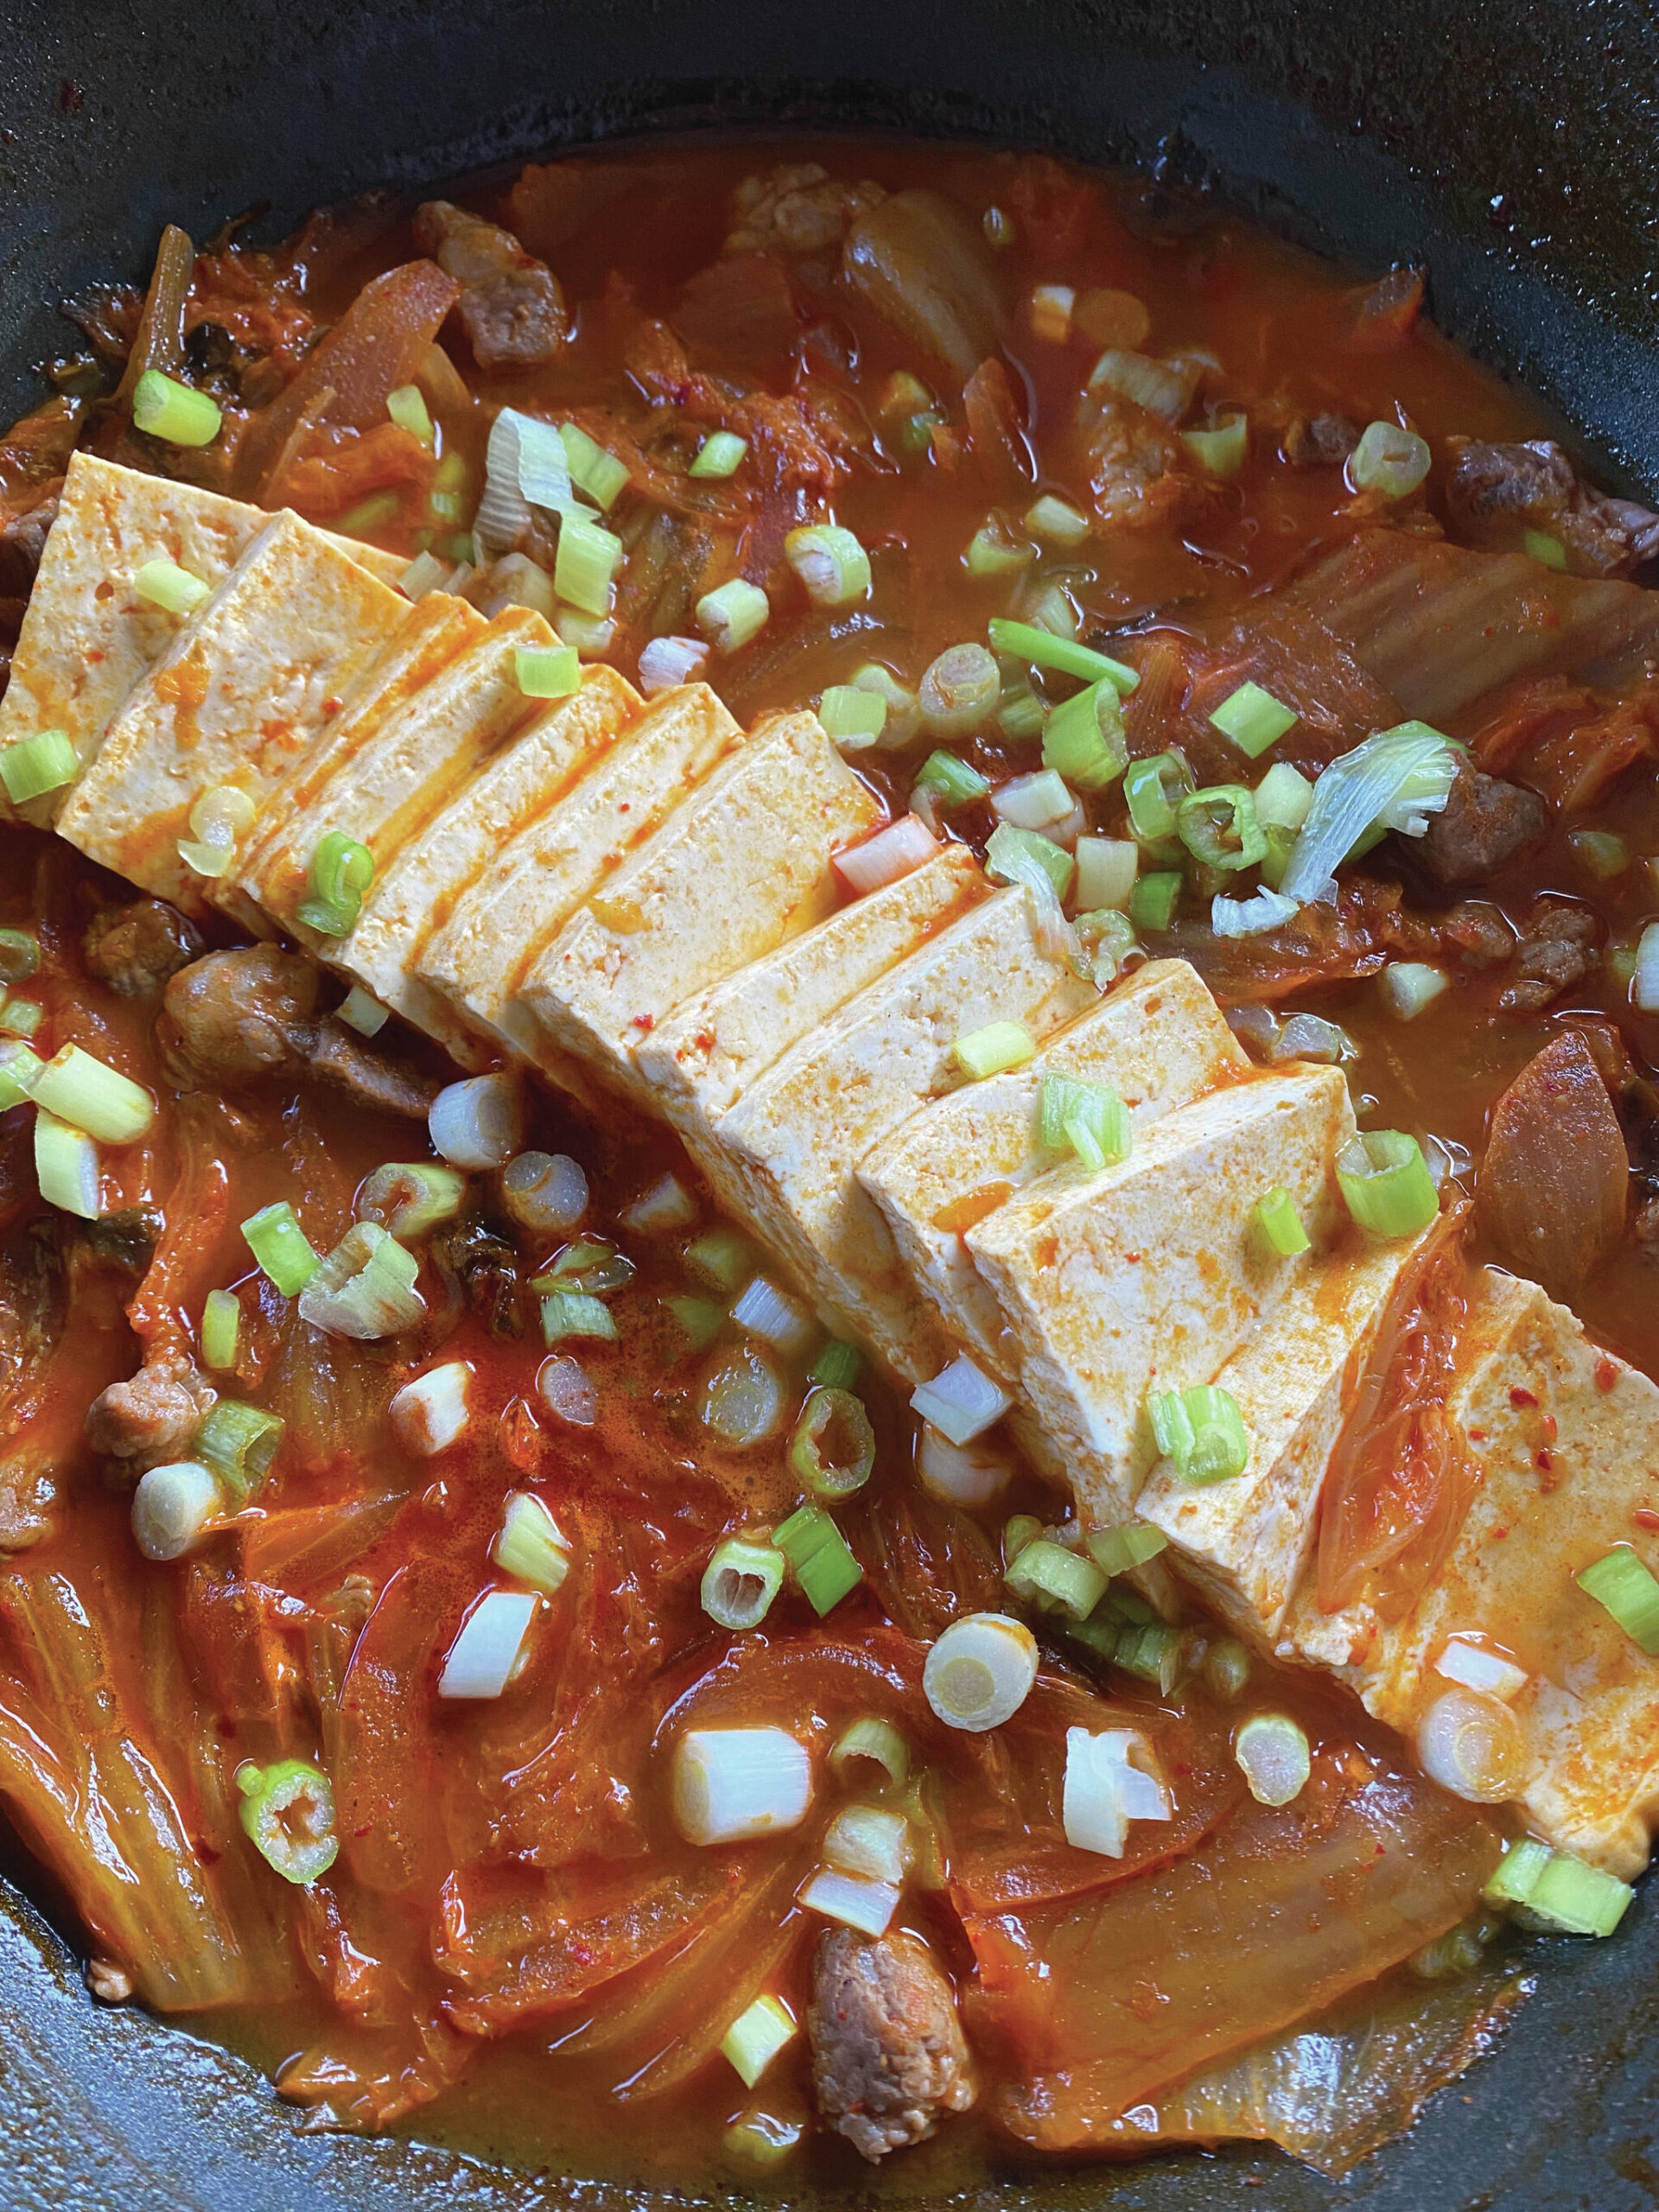 Photo by Tressa Dale/Peninsula Clarion
Pork, fermented kimchi and tofu make the base of this recipe for Kimchi stew.